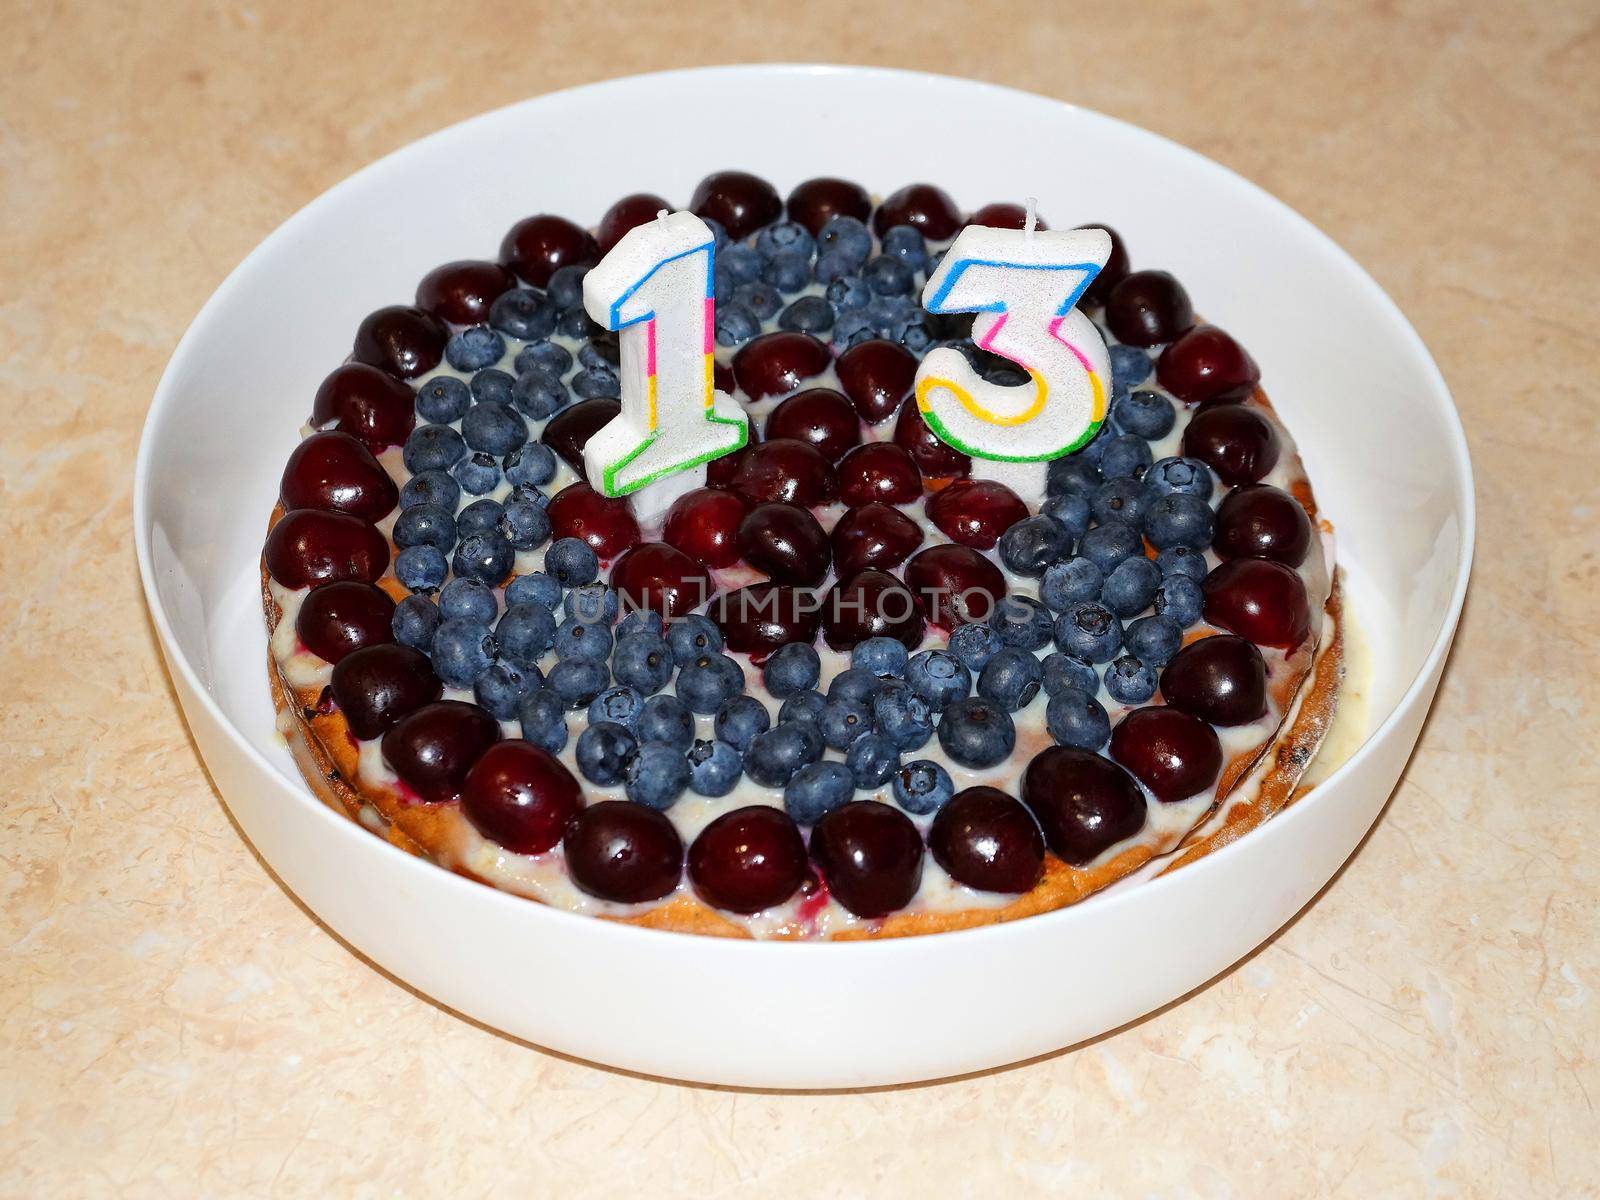 candles with number 13 on cherry cake, thirteenth birthday close-up